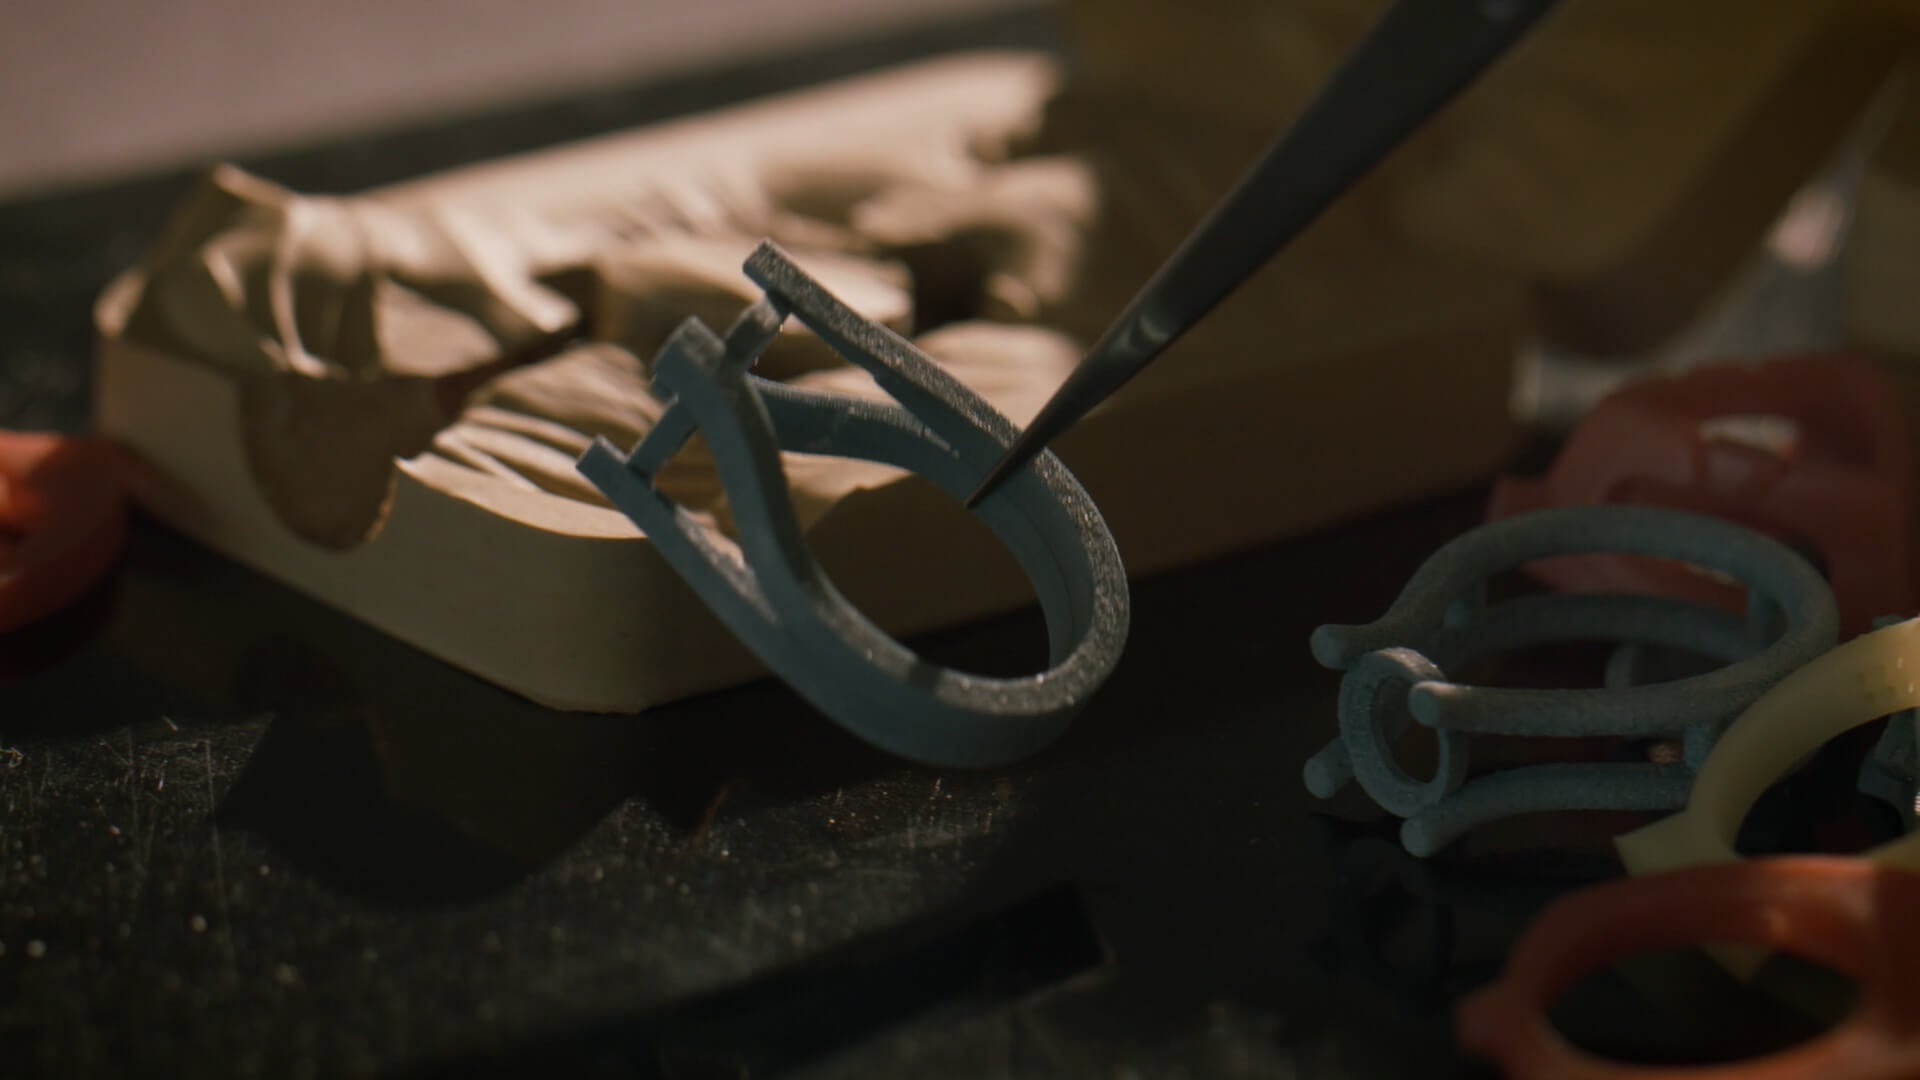 A 3D printed scale model of custom wedding ring alongside crafting tools on a workbench.